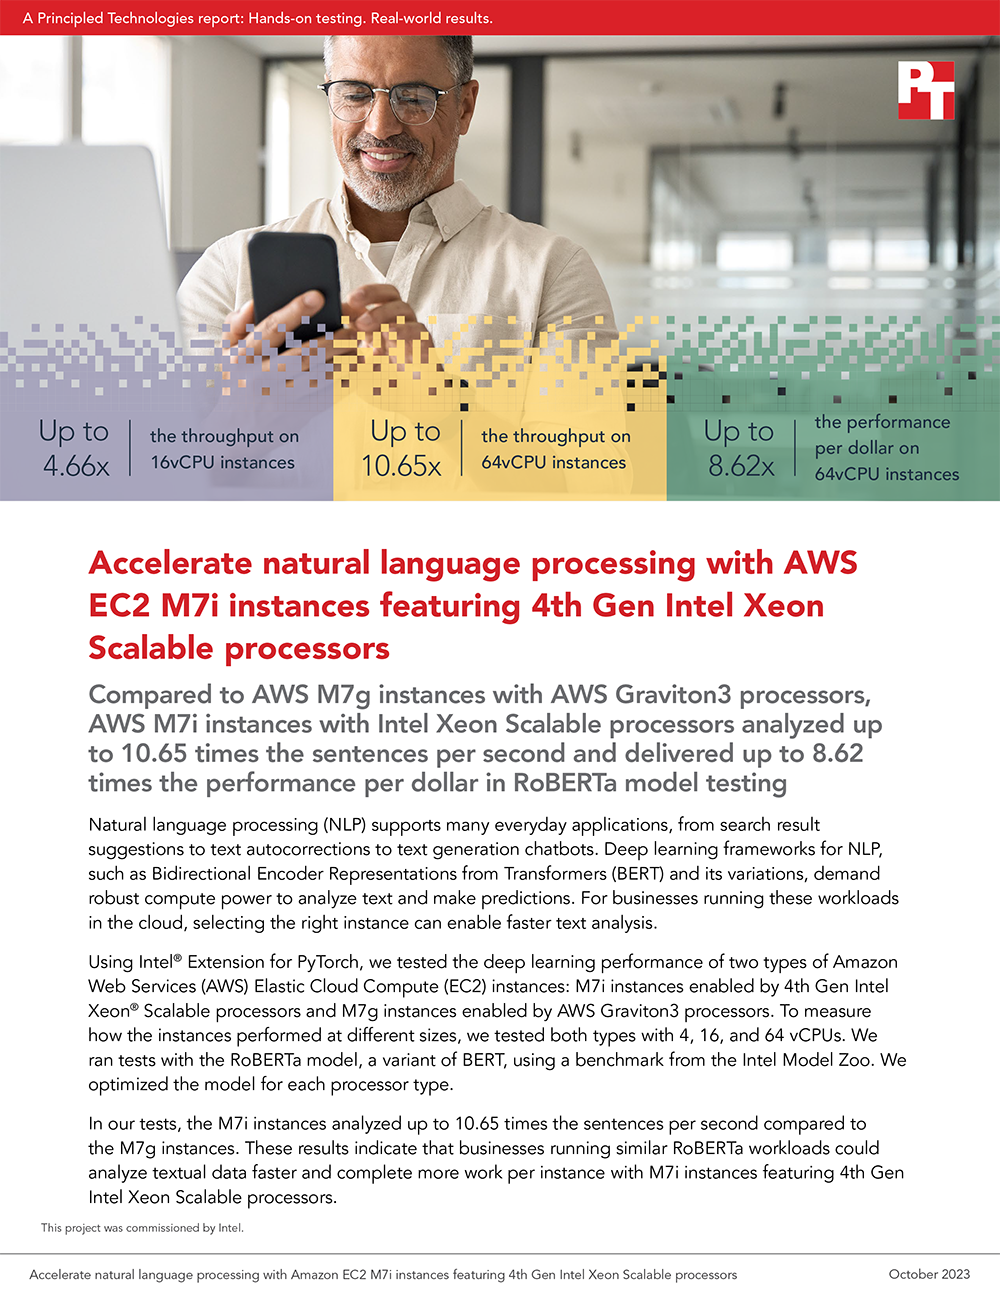 New Principled Technologies Study Reveals Better NLP Performance and Value from Amazon EC2 M7i Instances Featuring 4th Gen Intel Xeon Scalable Processors